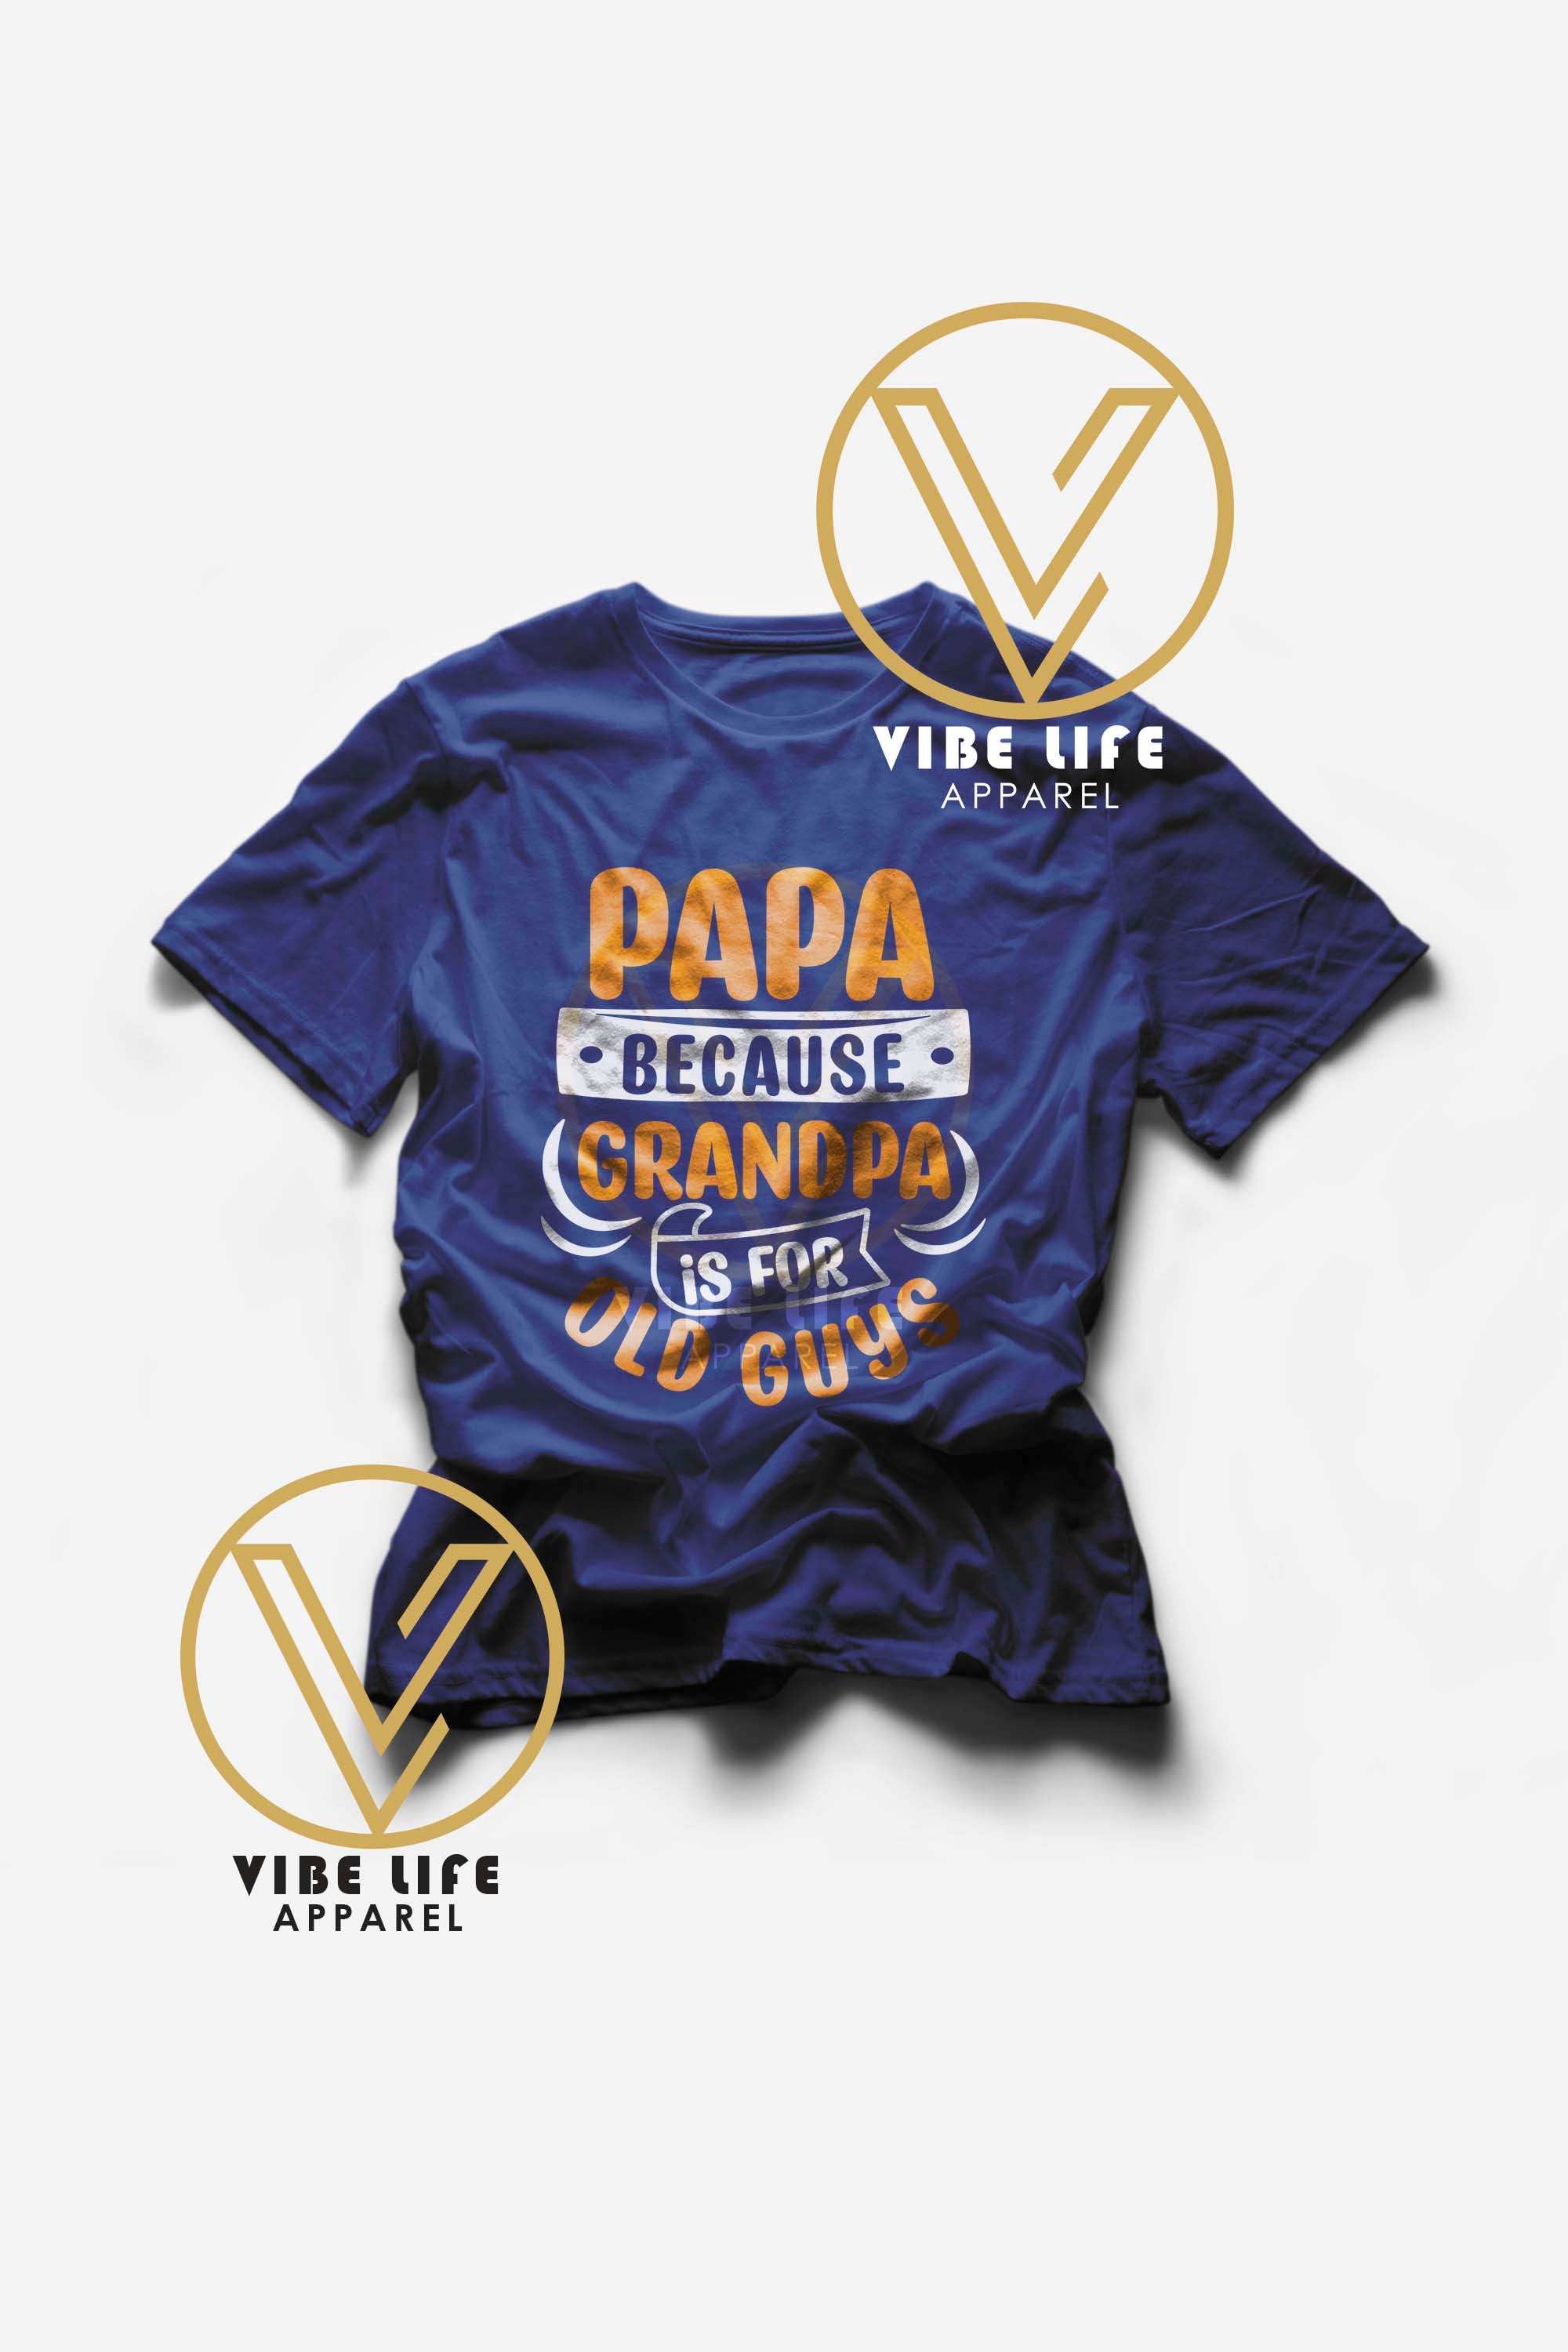 Papa Because Grandpa is For Old Guys - Unisex Softstyle Crewneck Tee